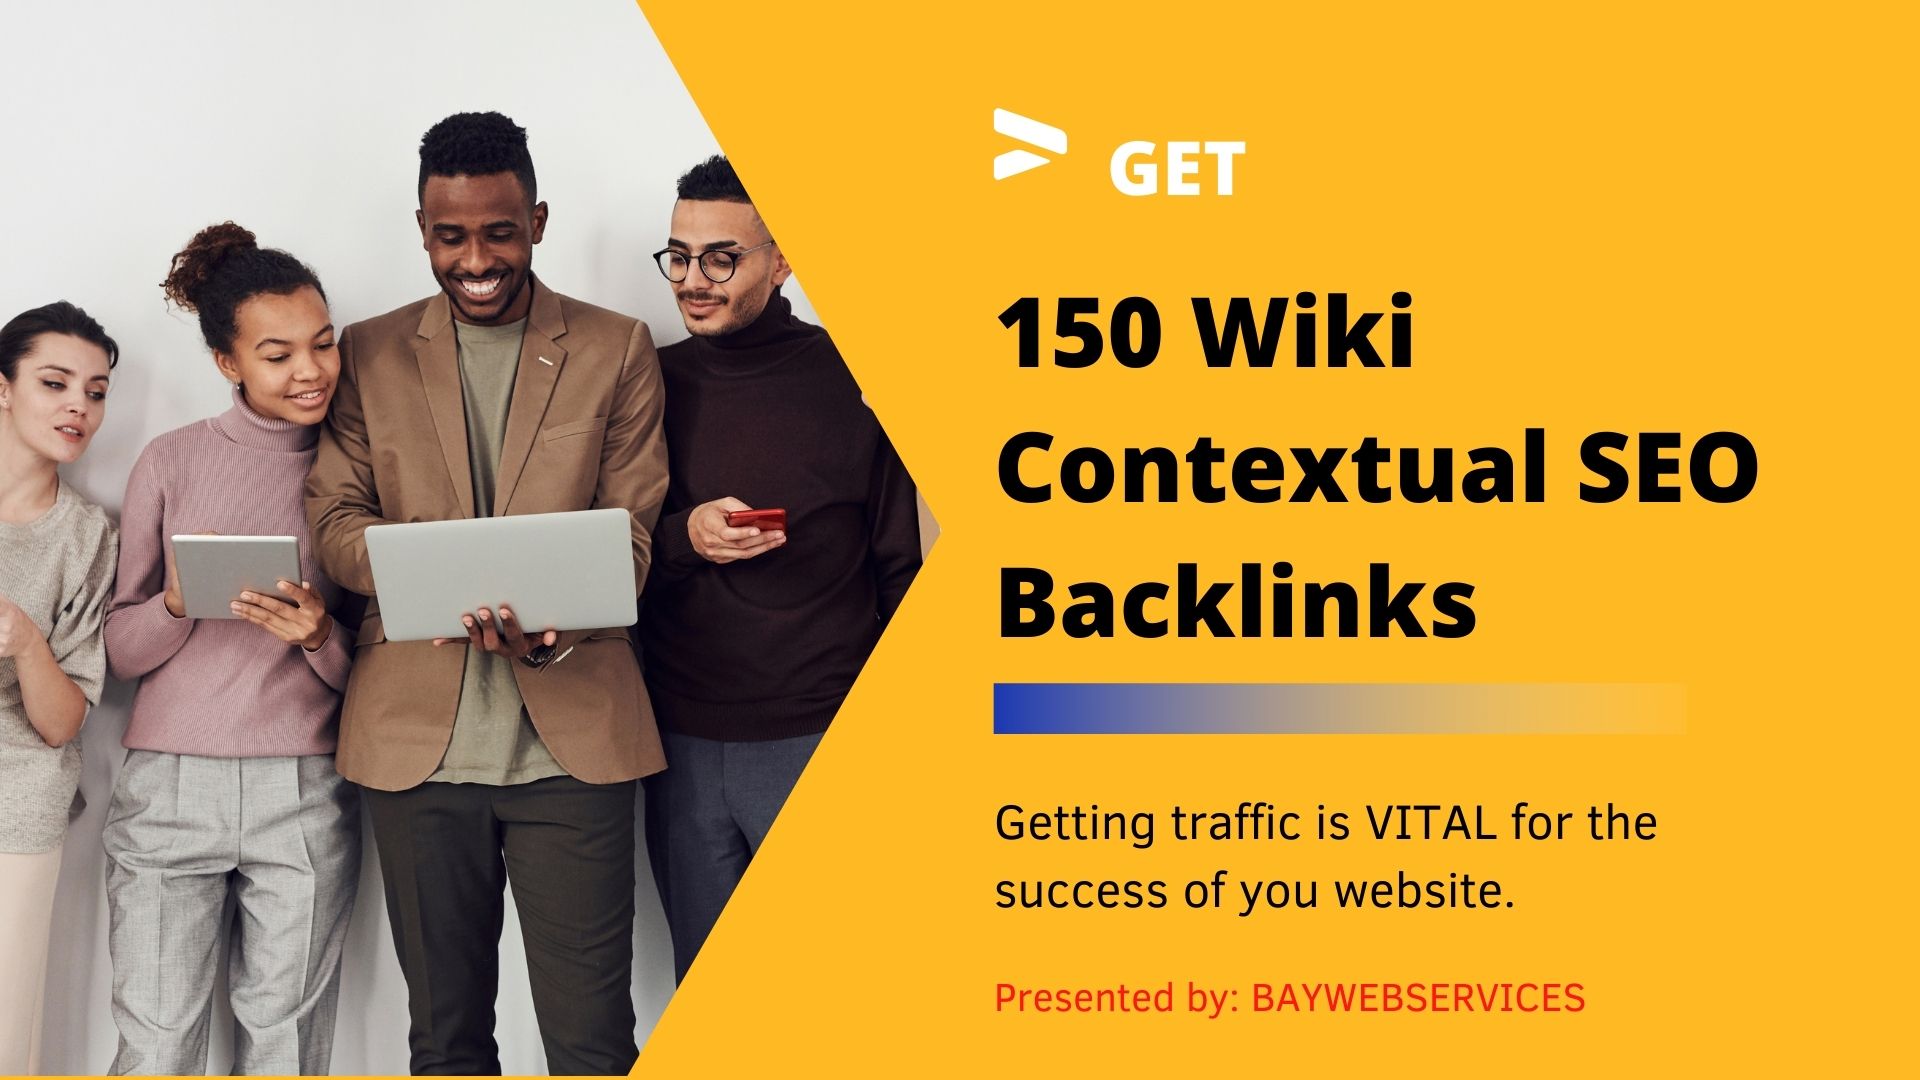 Get 150 Articls Contextual SEO Backlinks from Private Wiki Sites